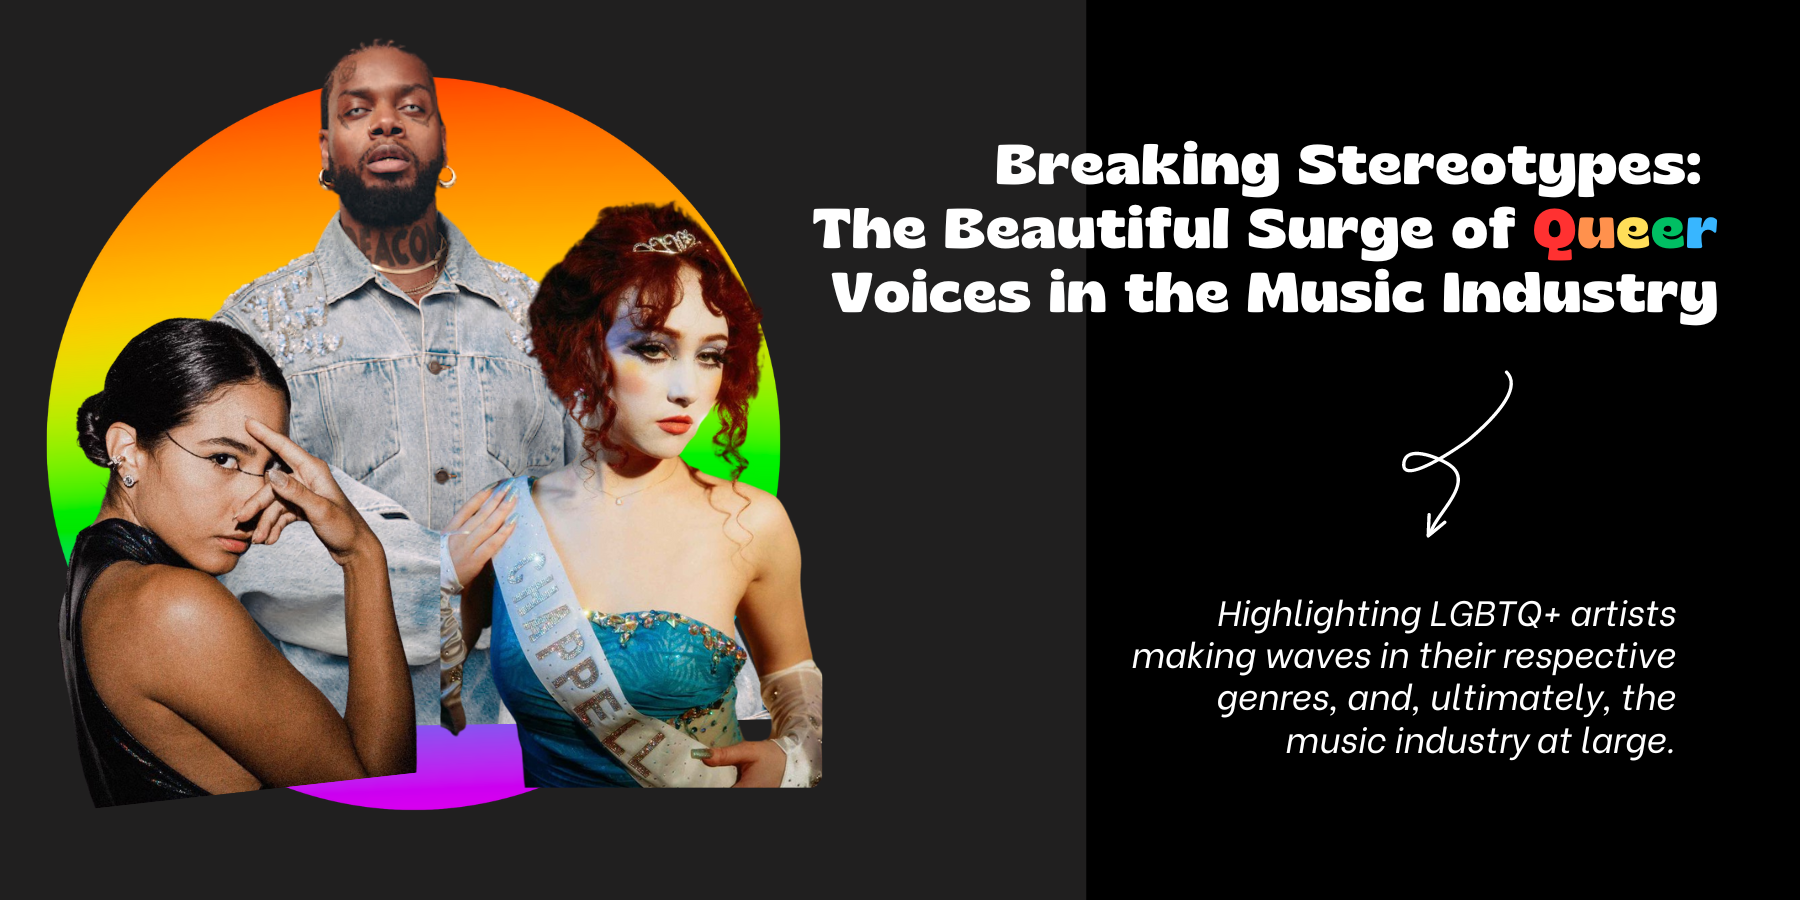 Breaking Stereotypes: The Beautiful Surge of Queer Voices in the Music Industry